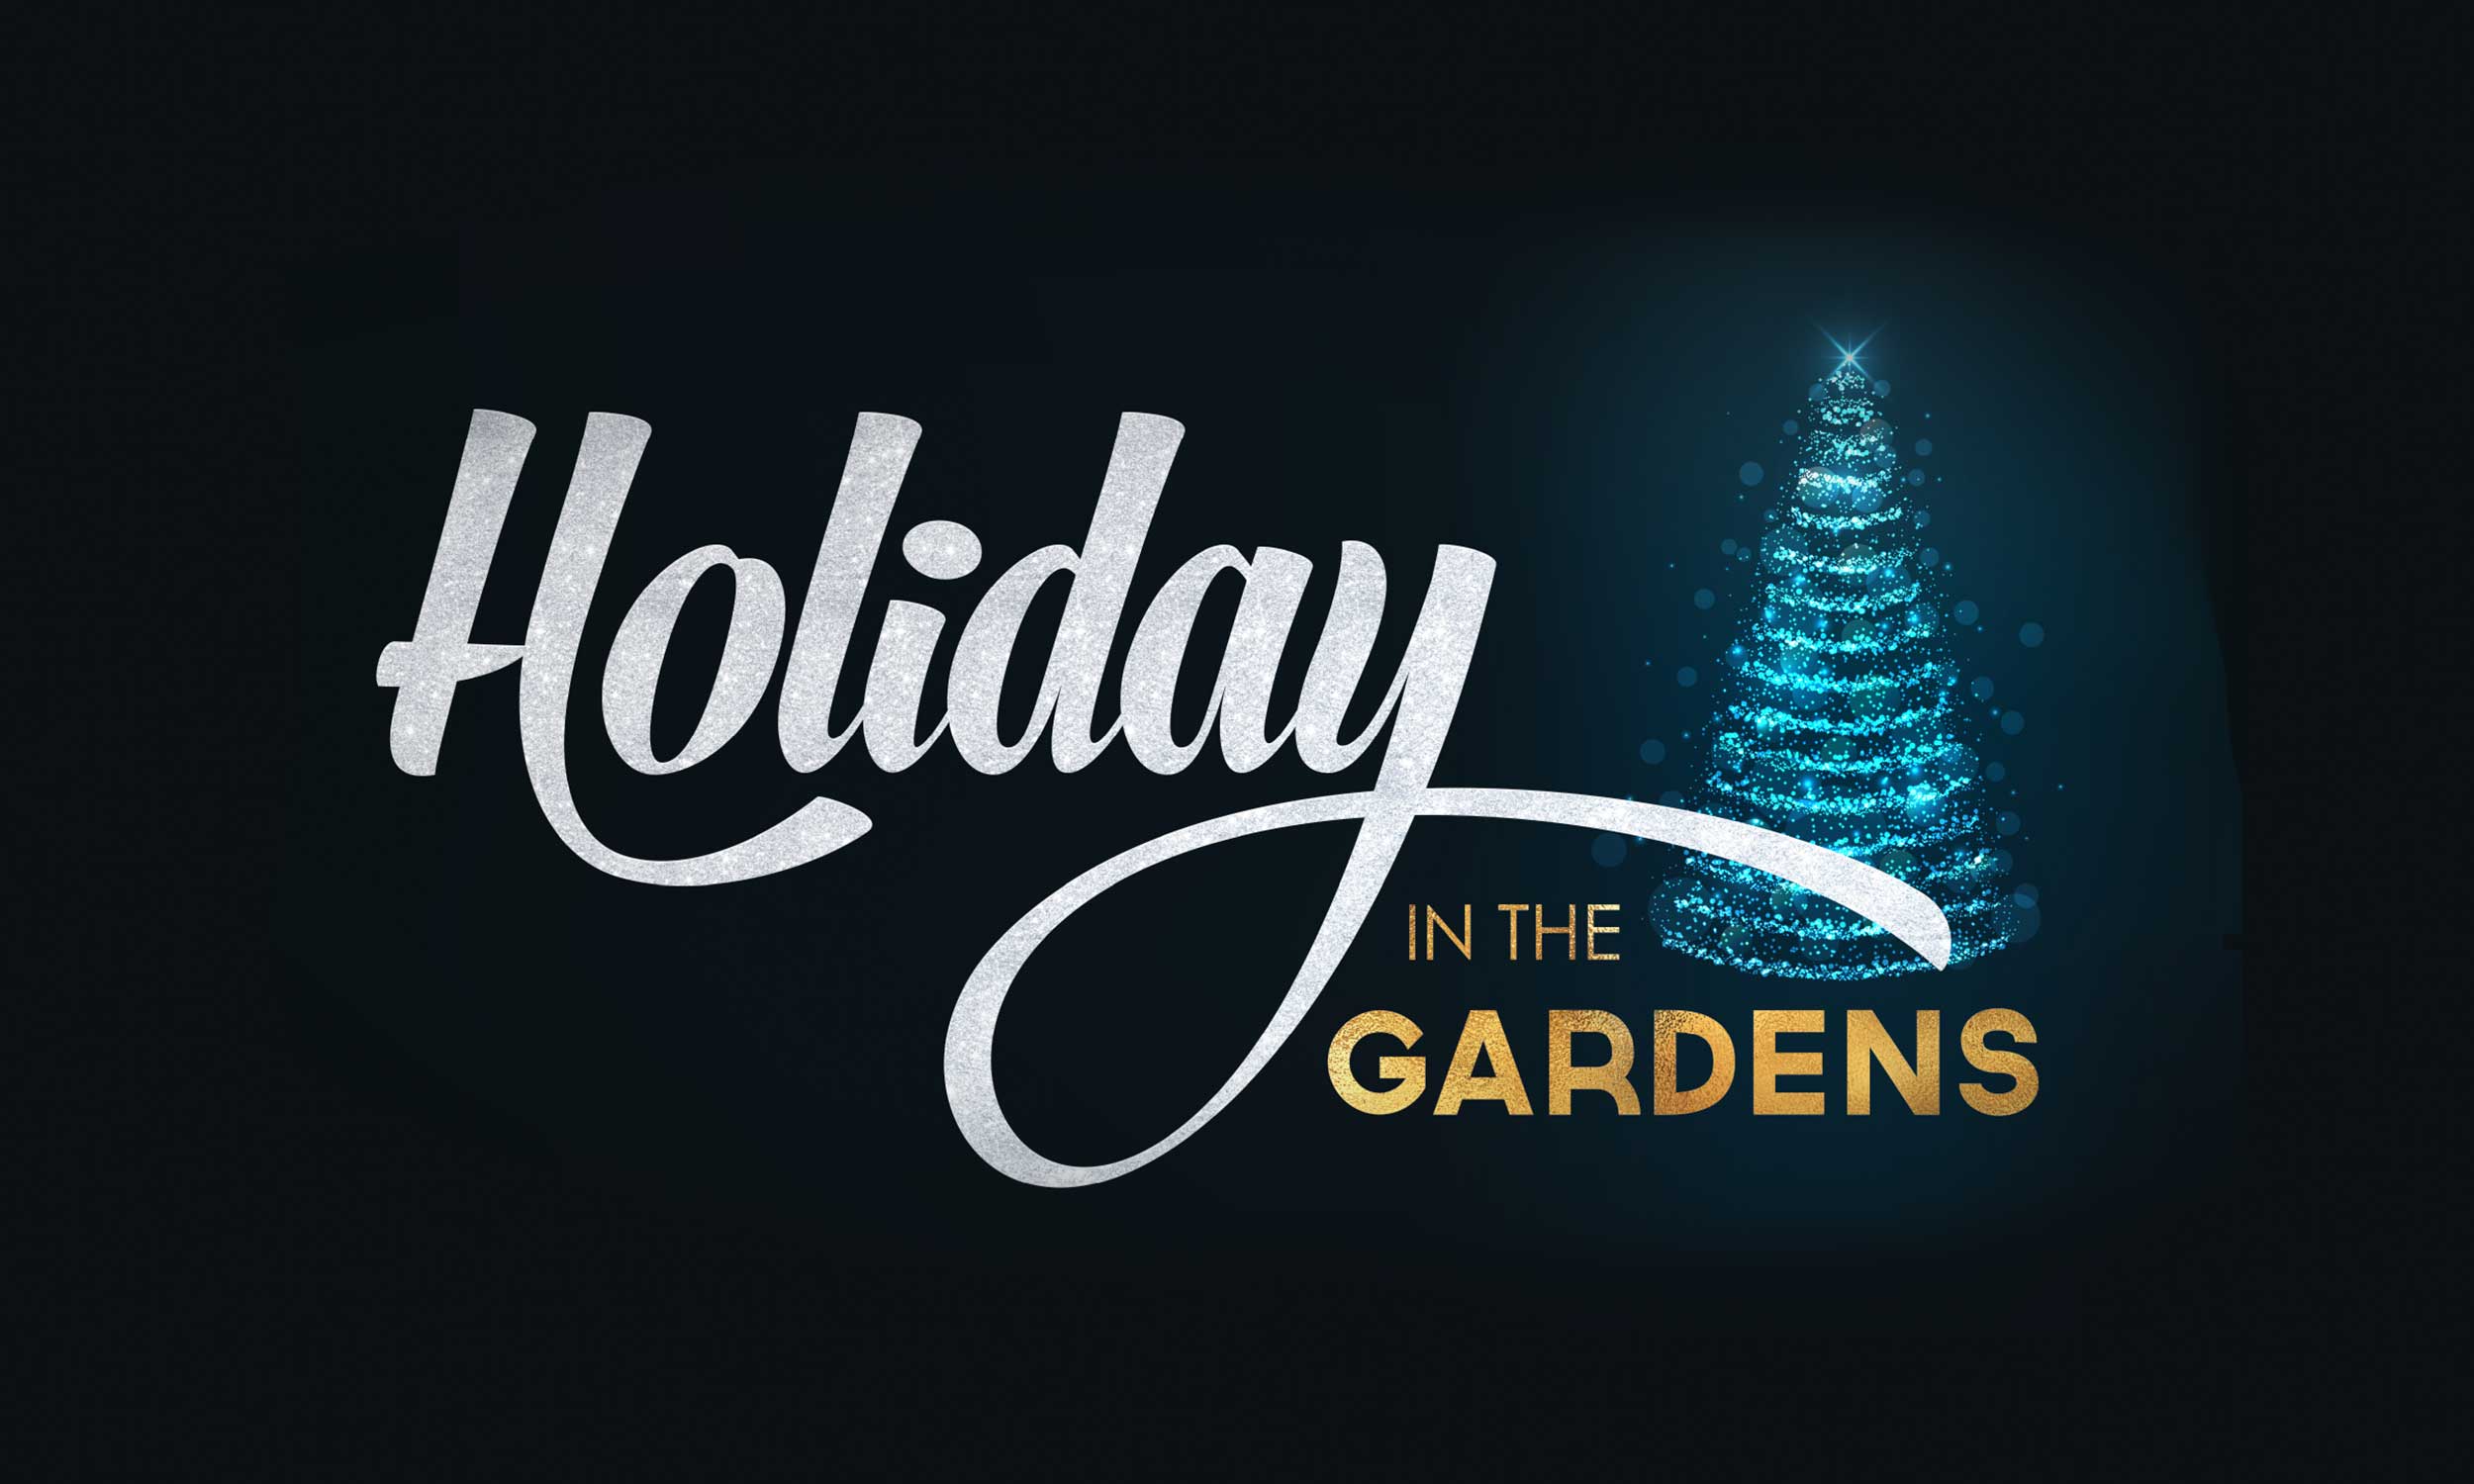 Brand Design for Moody Gardens, Holiday in the Gardens Events